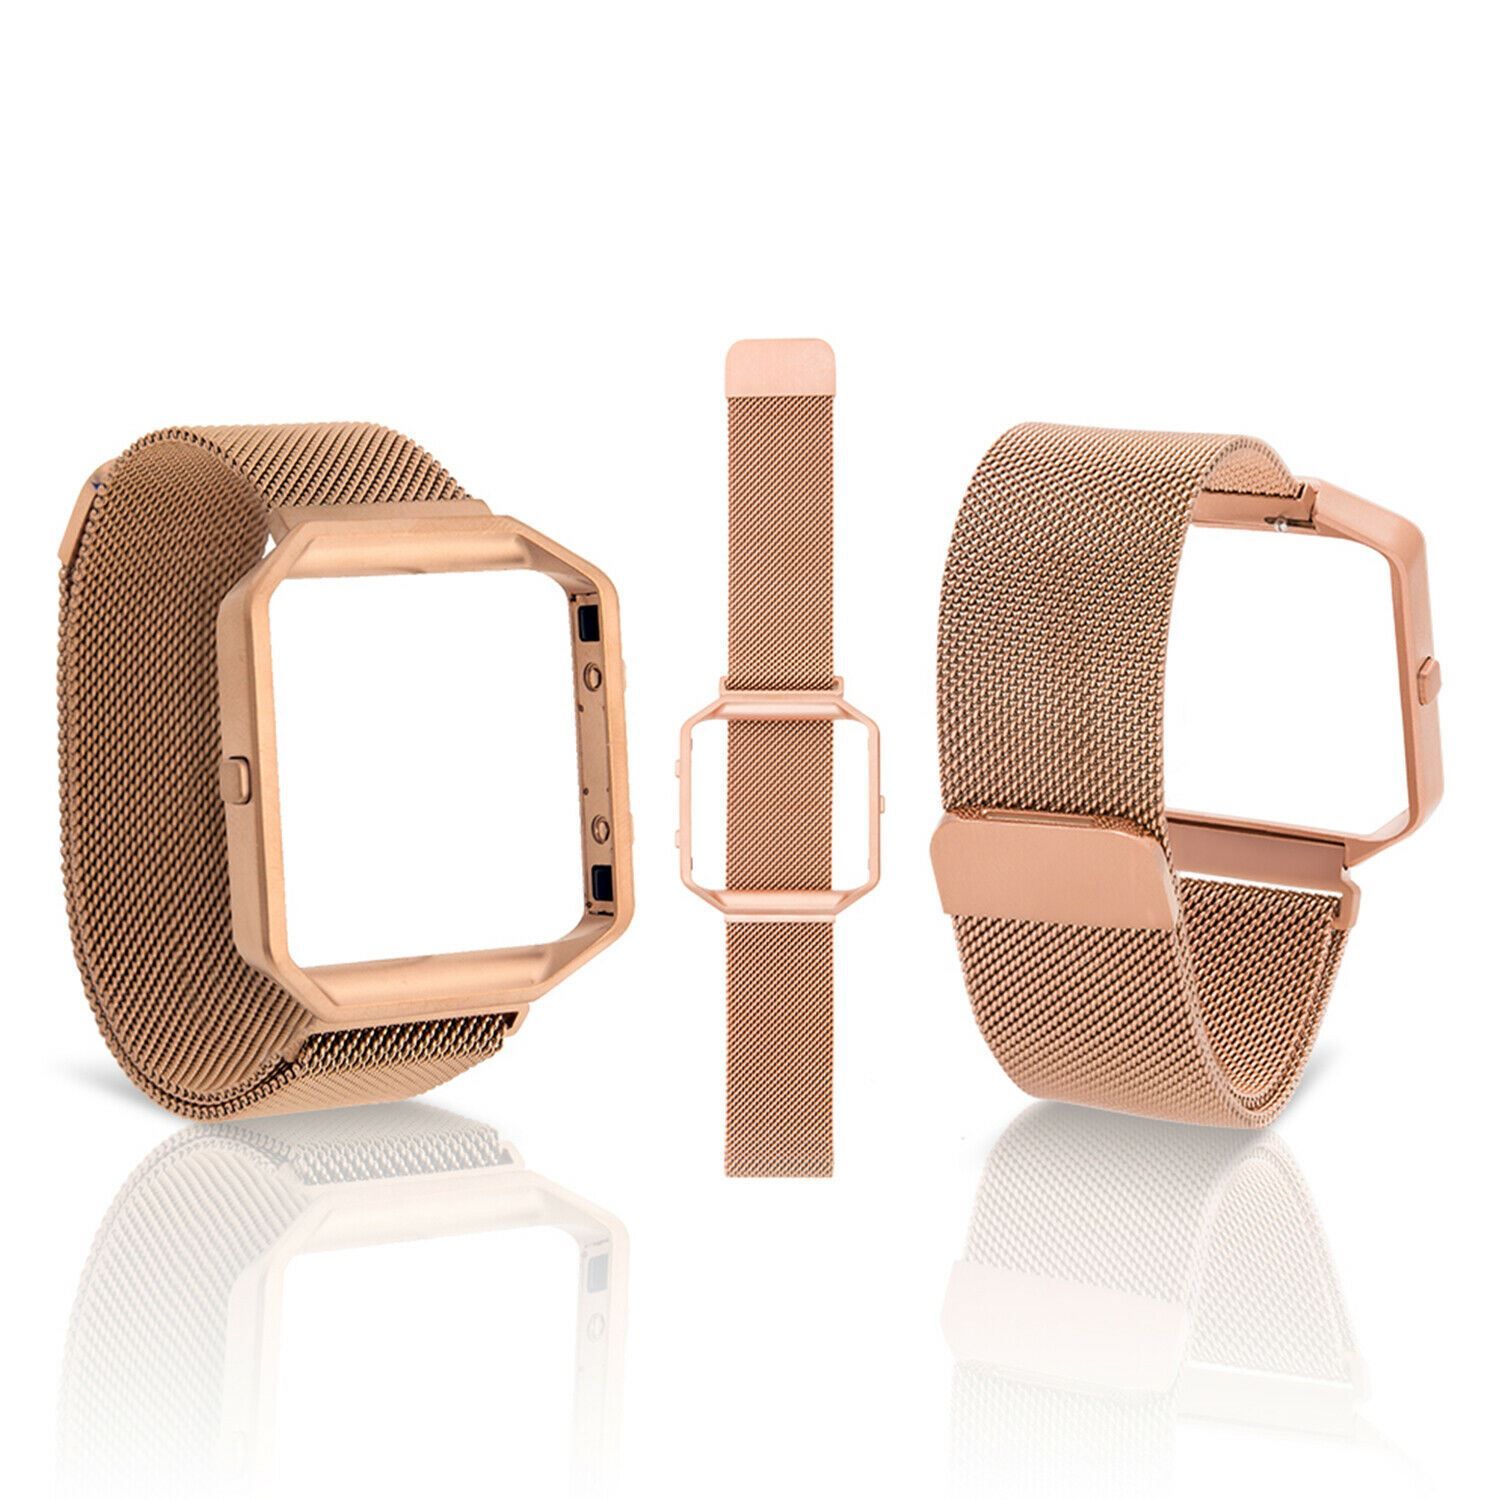 AQ Fitbit Blaze straps Rose Gold  A must Have for Fitbit Blaze, nice replacement accessories for Fitbit Blaze Smart Watch. Easy to install and remove. A high-quality wristband cover protects your smartwatch without falling off. Comfortable, durable materials make these bands your go-to accessory through exercise, sweat, sleep, and beyond. Features a combination of functionality and style.